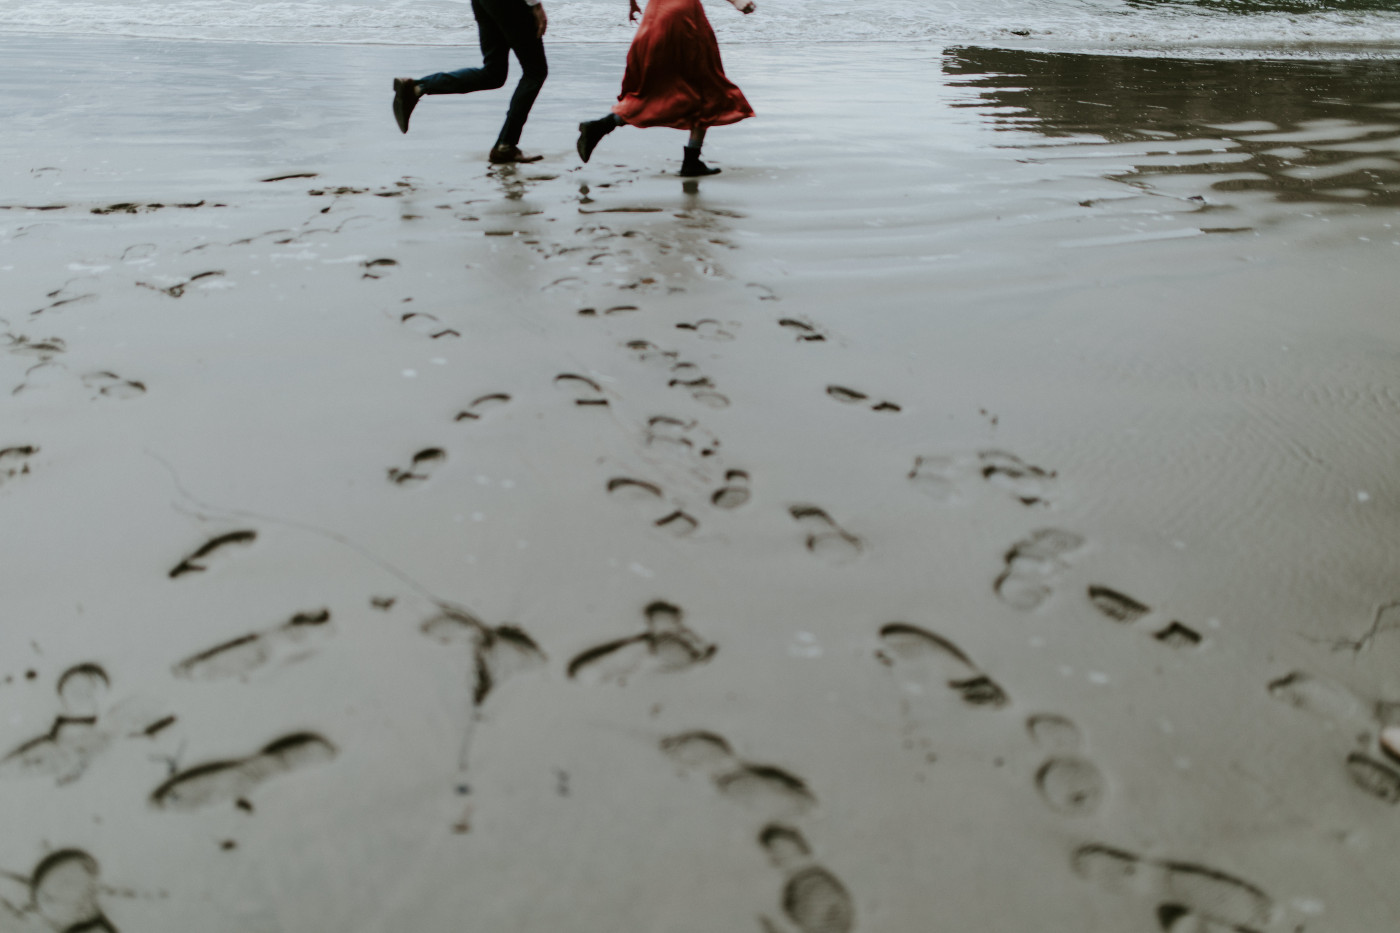 Chelsey and Billy's footprints on the sand as they run together'. Elopement wedding photography at Cannon Beach by Sienna Plus Josh.